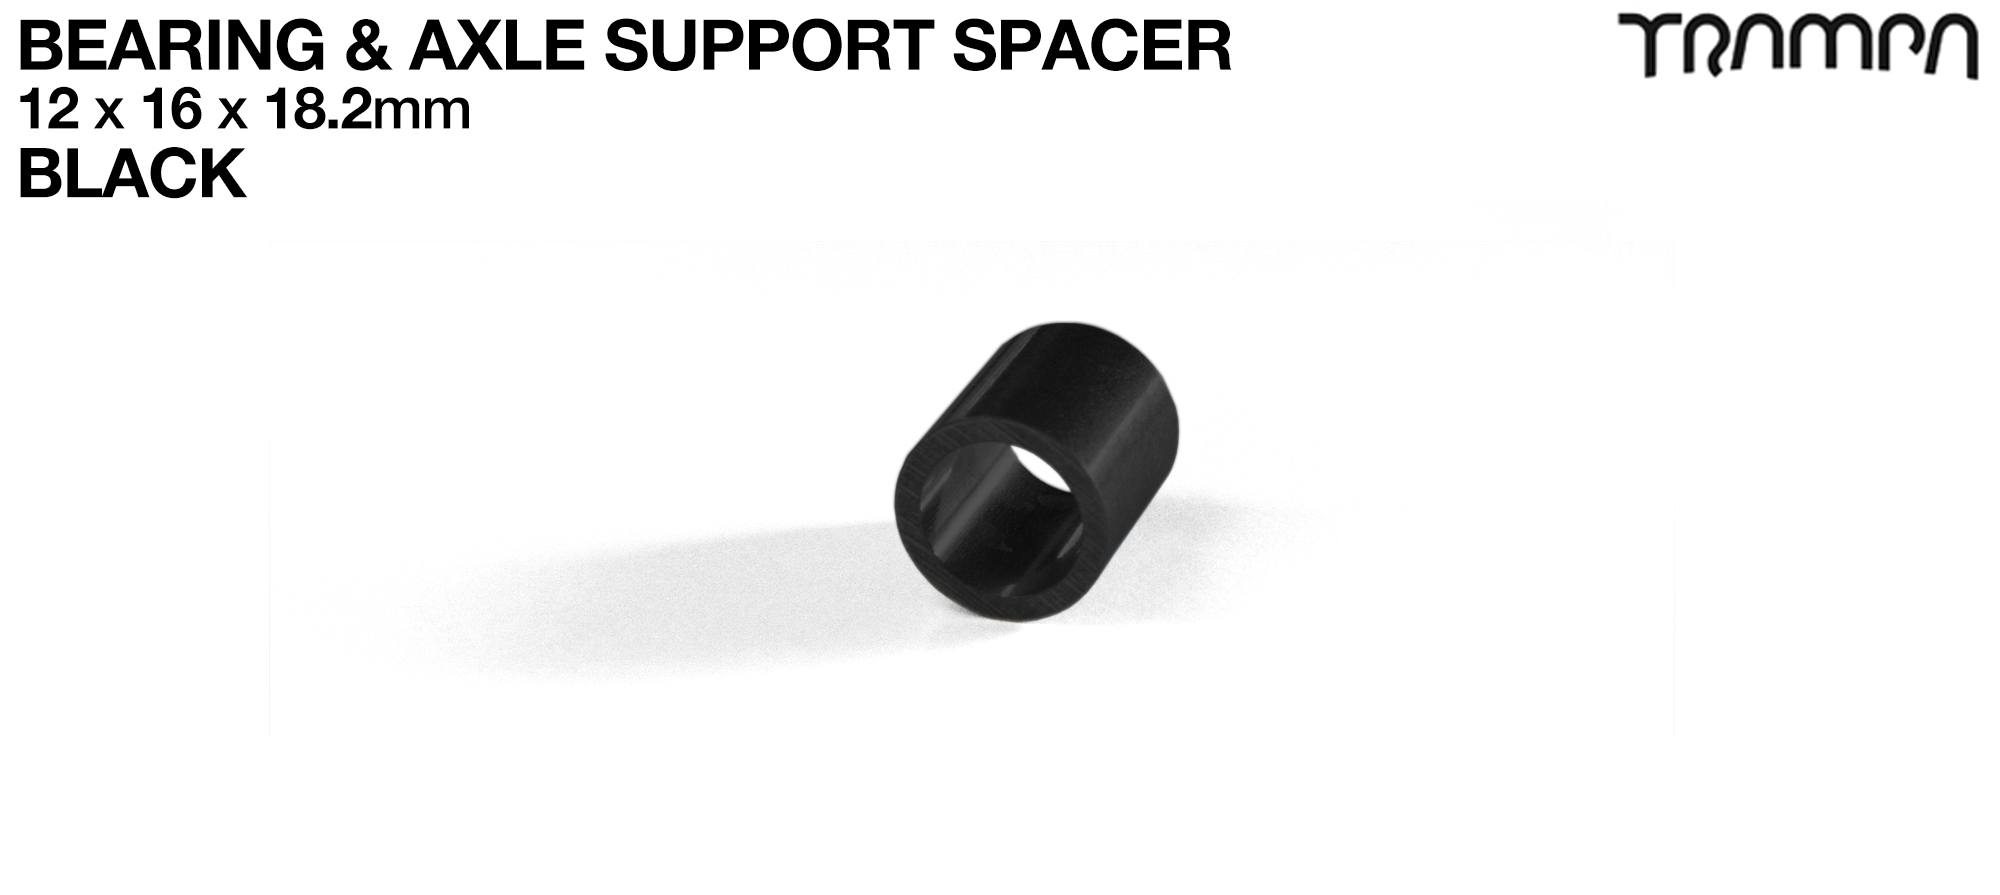 18.2mm Wheel Support Axle Spacers - BLACK 